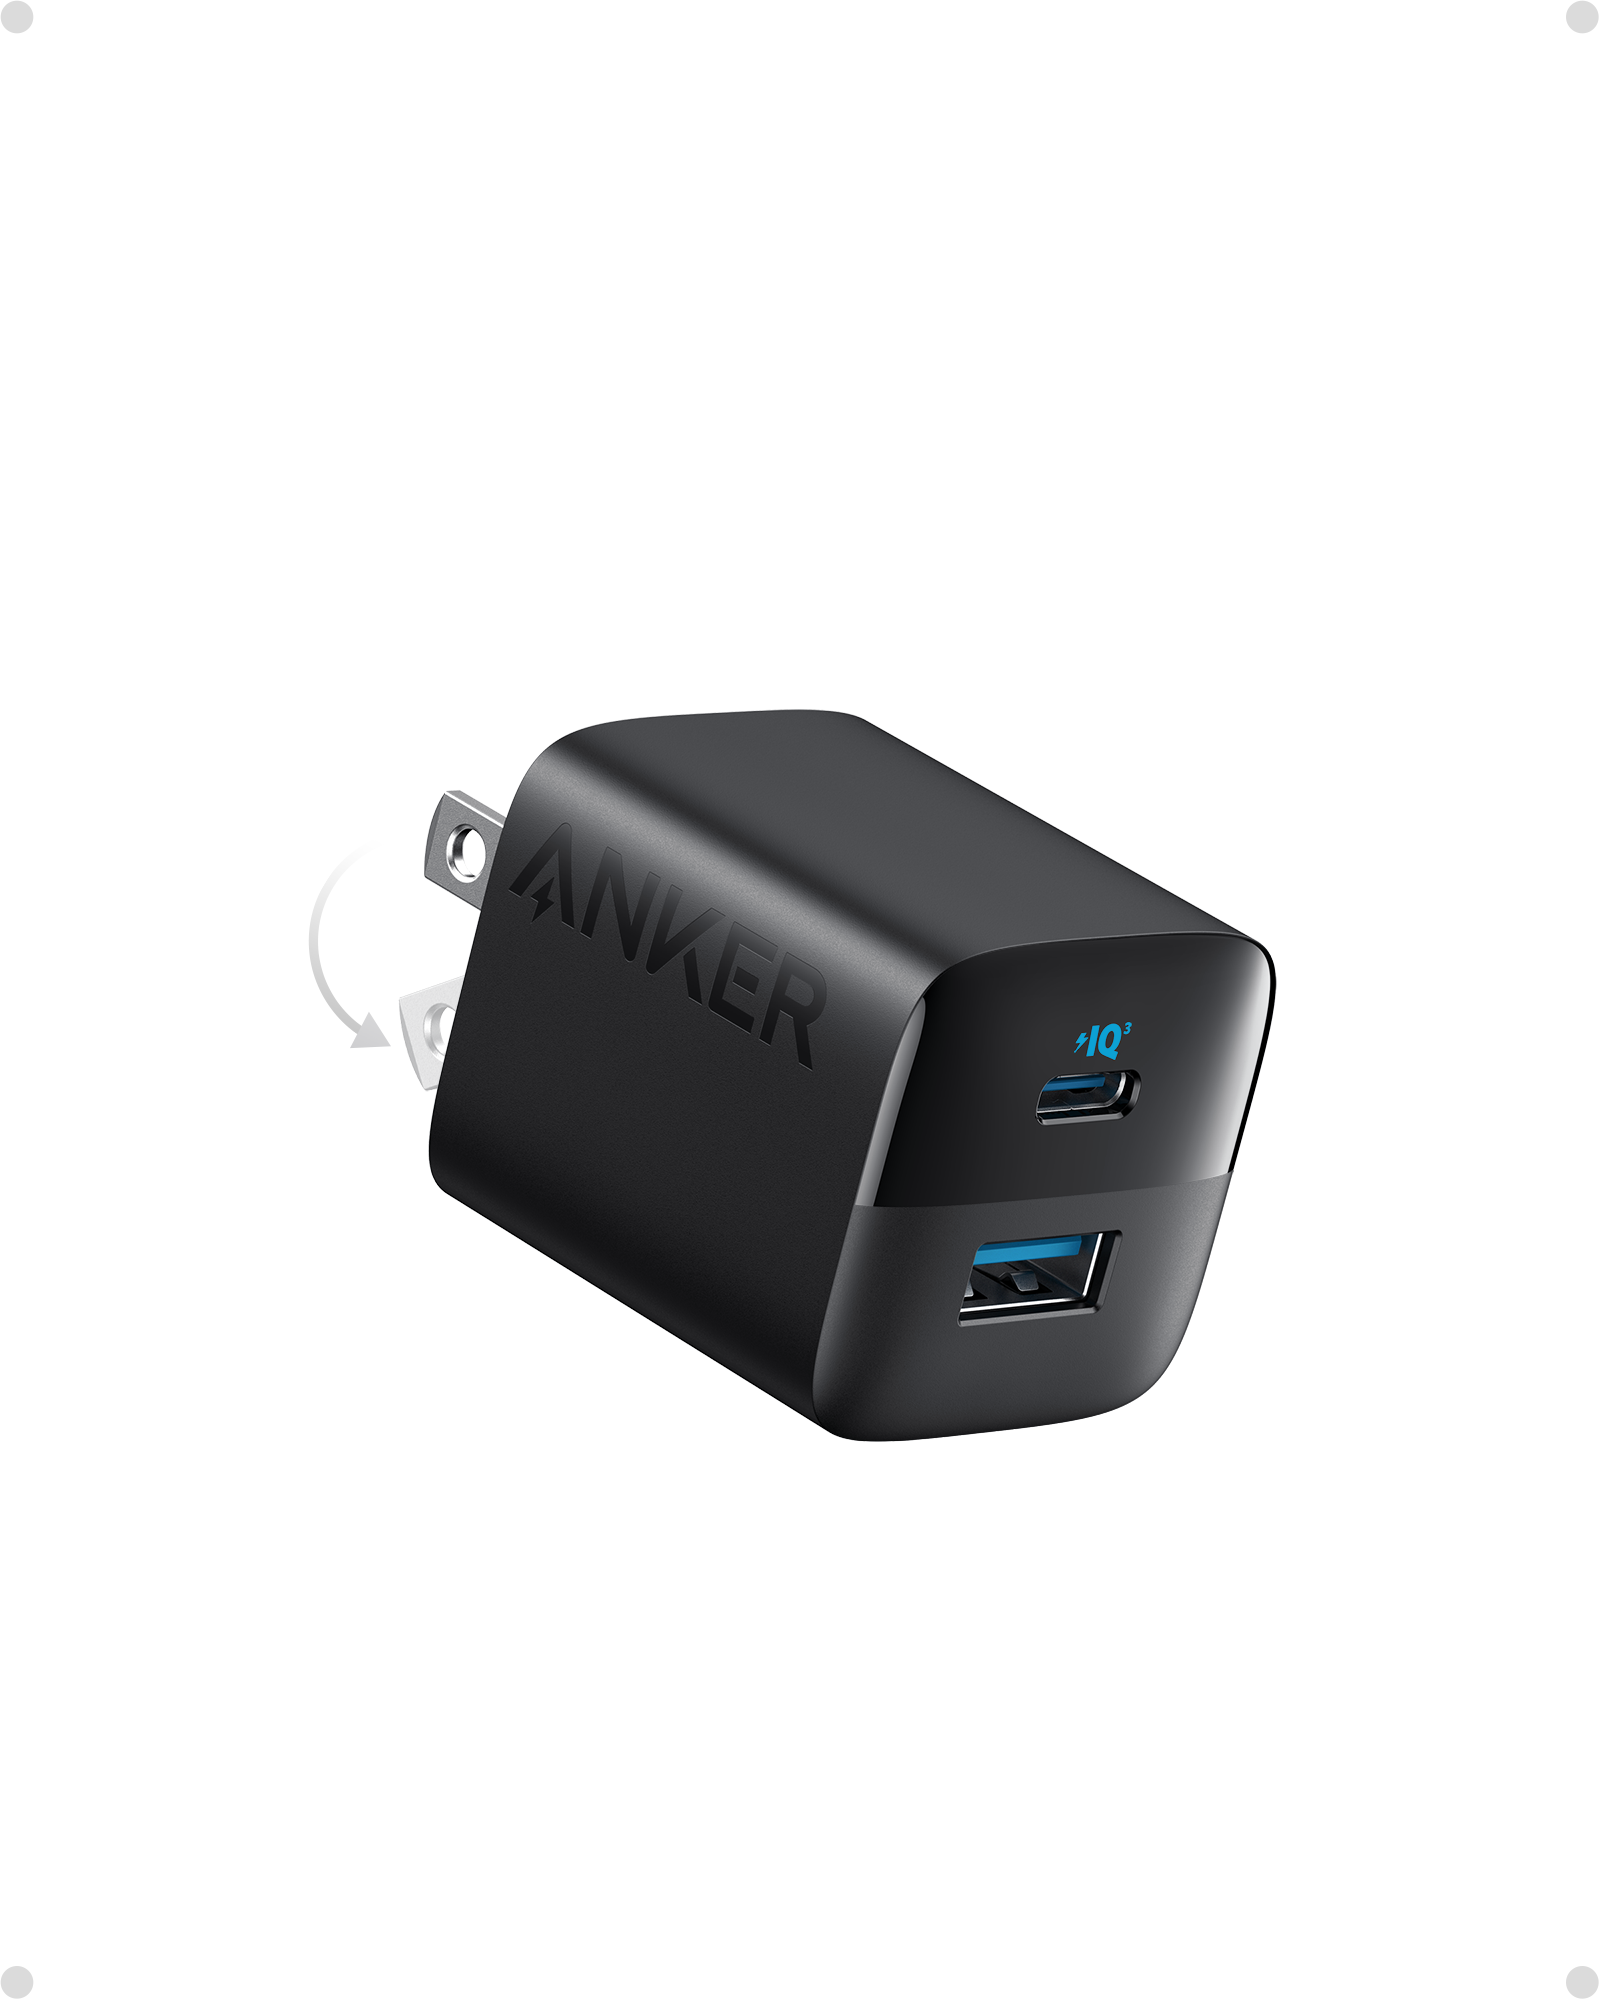 USB C Charger 33W, Anker 323 Charger, 2 Port Compact Charger with Foldable Plug for iPhone 14/14 Plus/14 Pro/14 Pro Max/13/12, Pixel, Galaxy, iPad/iPa